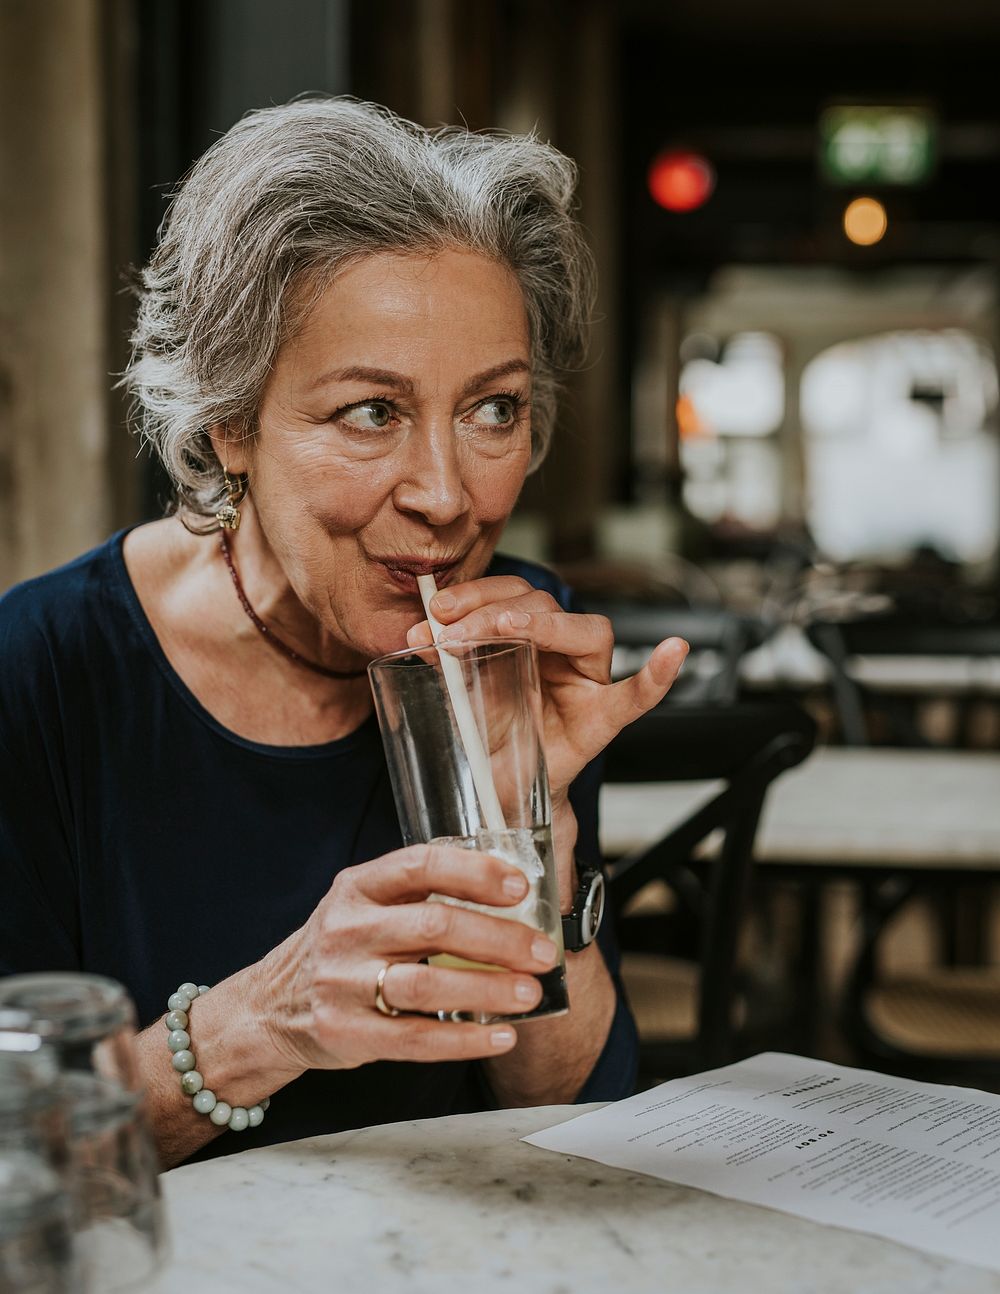 Woman drinking cocktail from straw